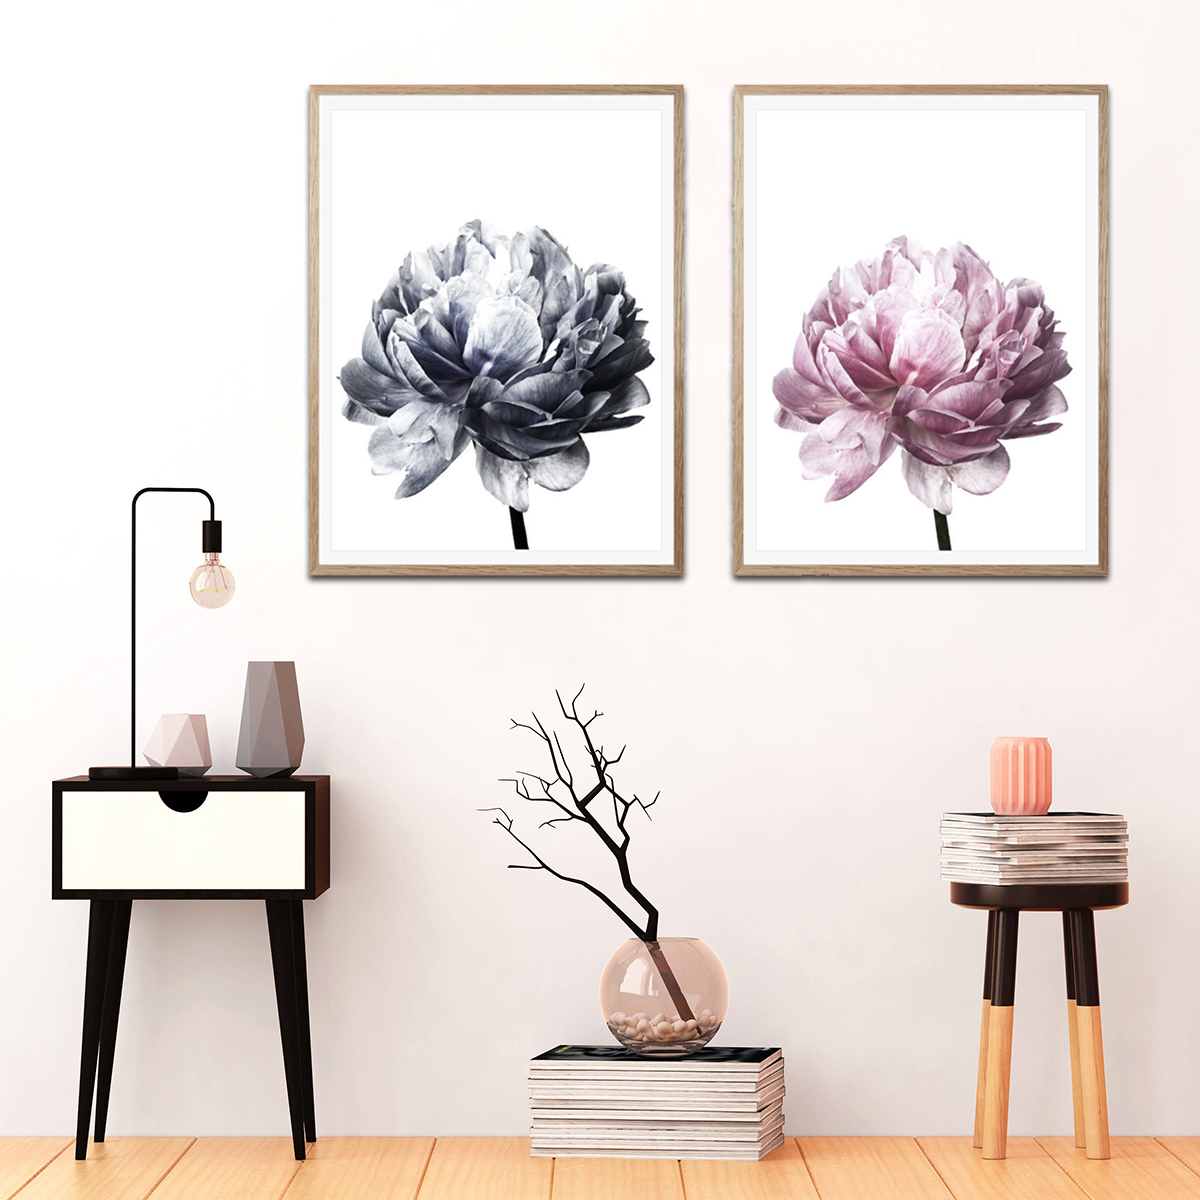 20x3030x40cm-Flower-Modern-Wall-Art-Canvas-Paintings-Picture-Home-Decor-Mural-Poster-with-Frame-1632681-1